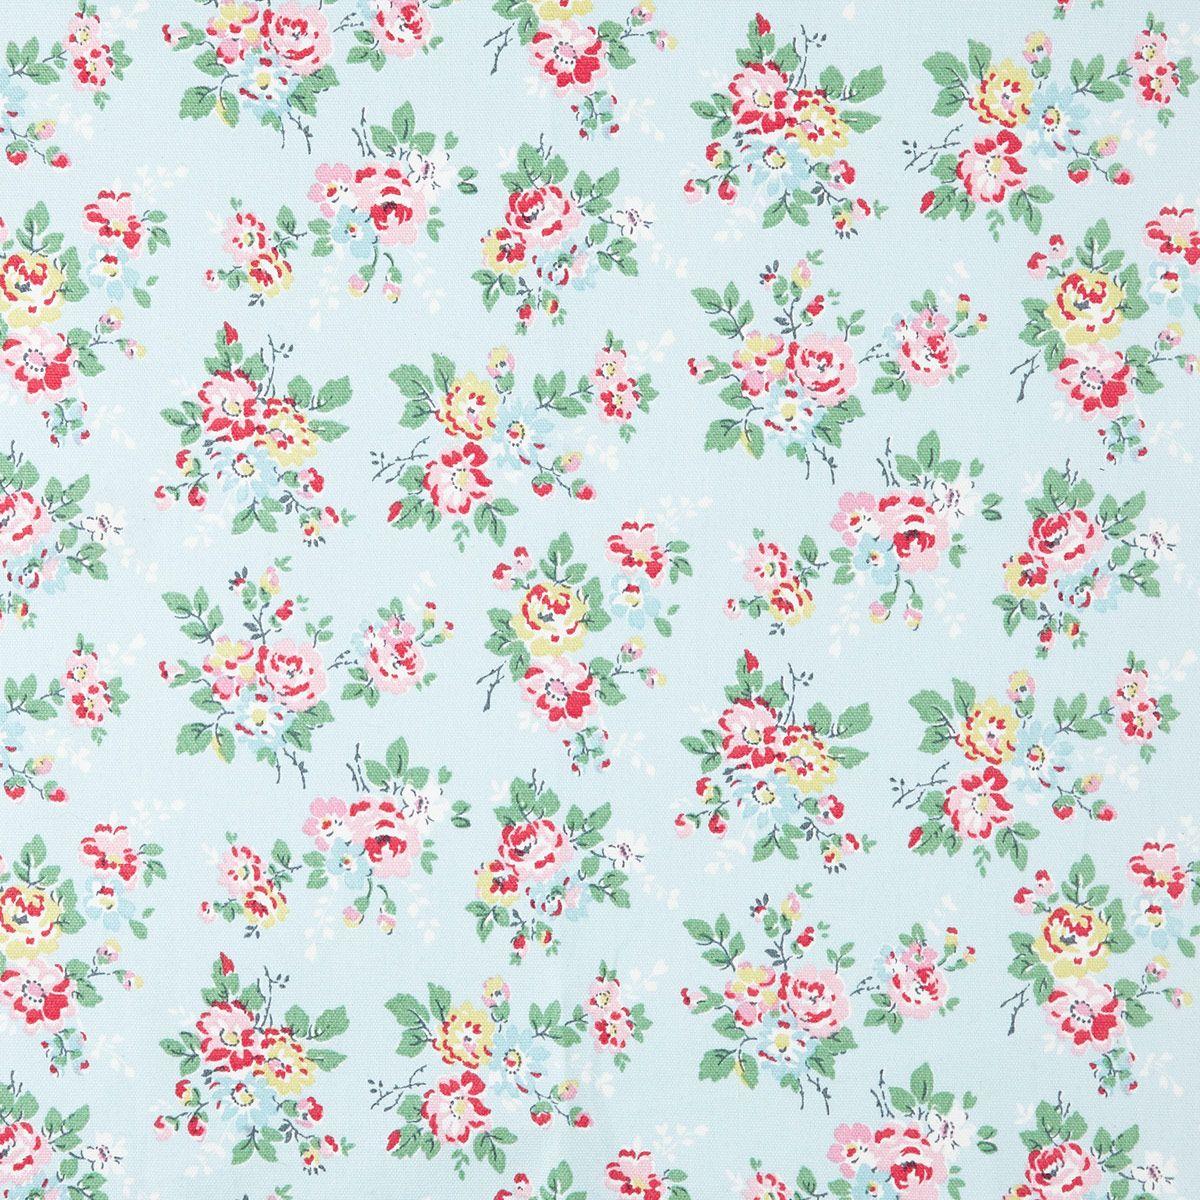 Cath Kidston Wallpapers - Top Free Cath 